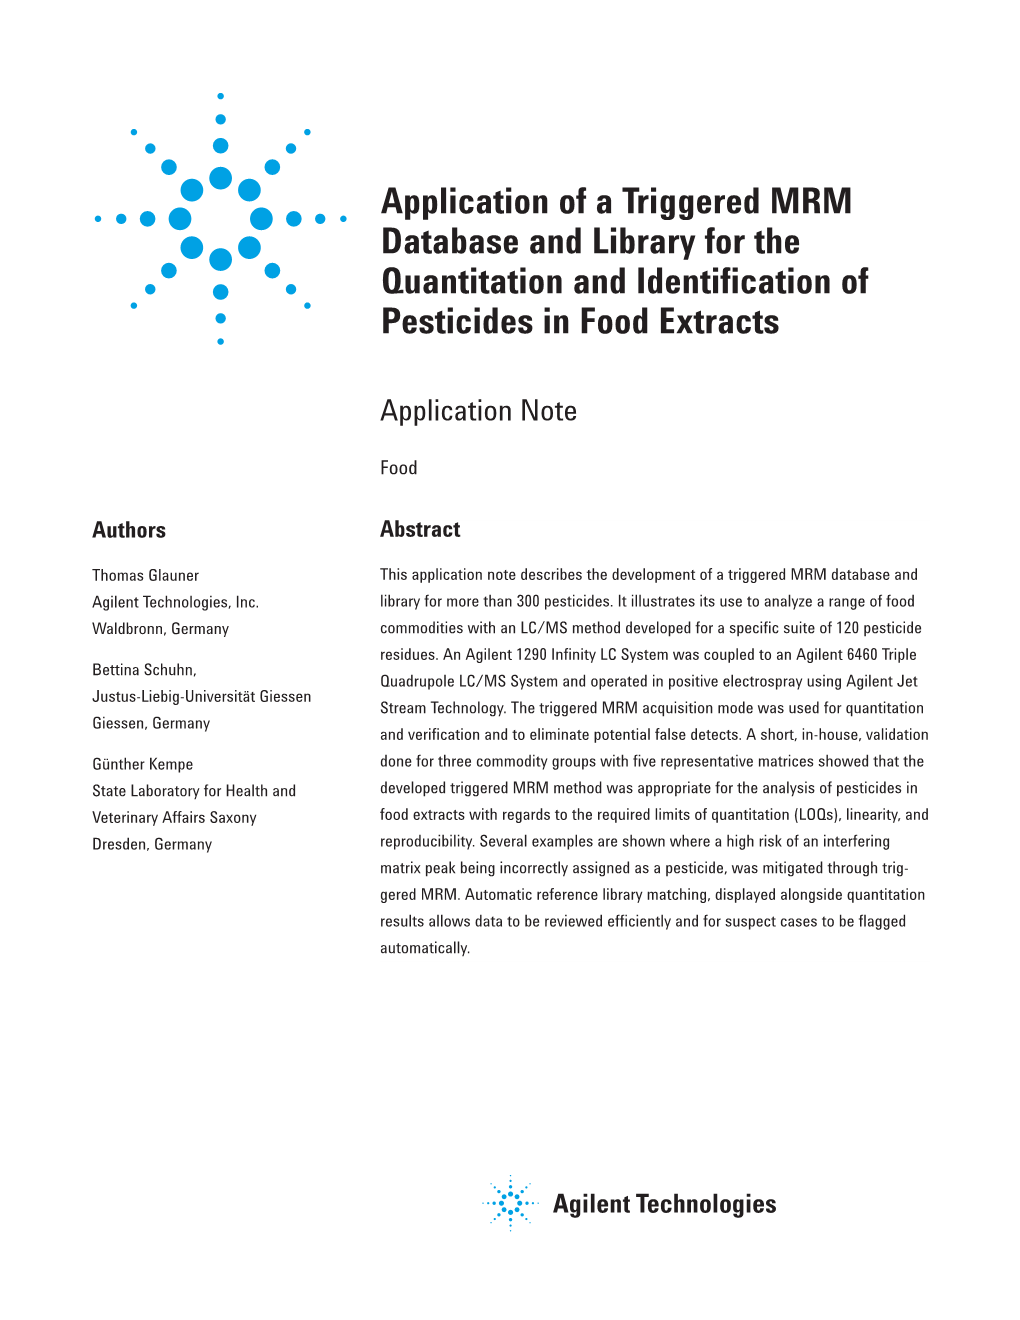 Application of a Triggered MRM Database and Library for the Quantitation and Identification of Pesticides in Food Extracts